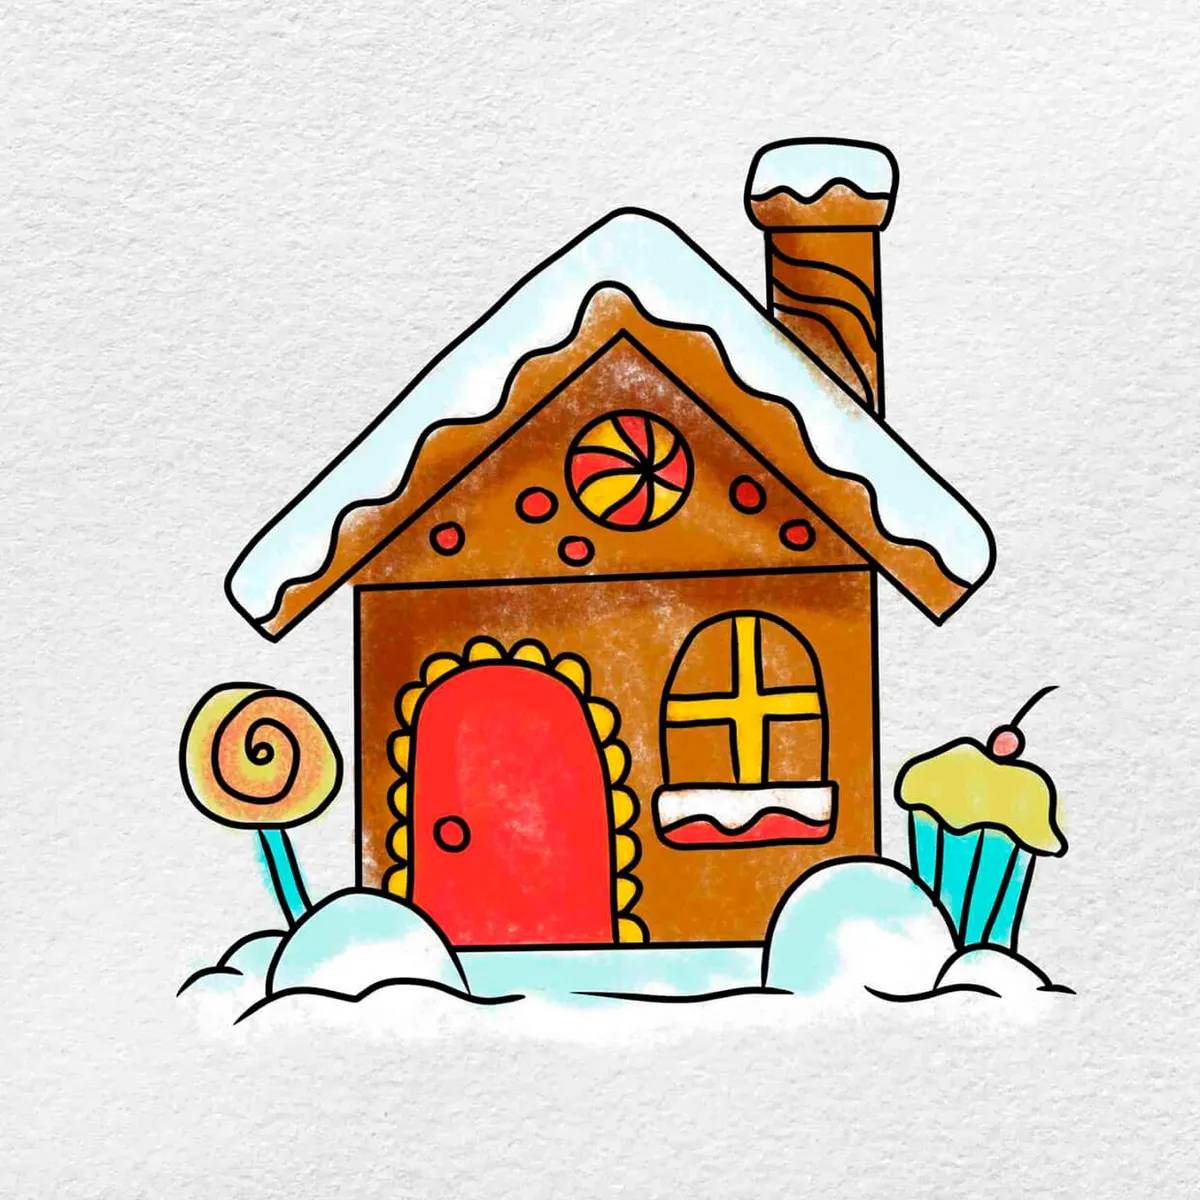 How to draw a gingerbread house